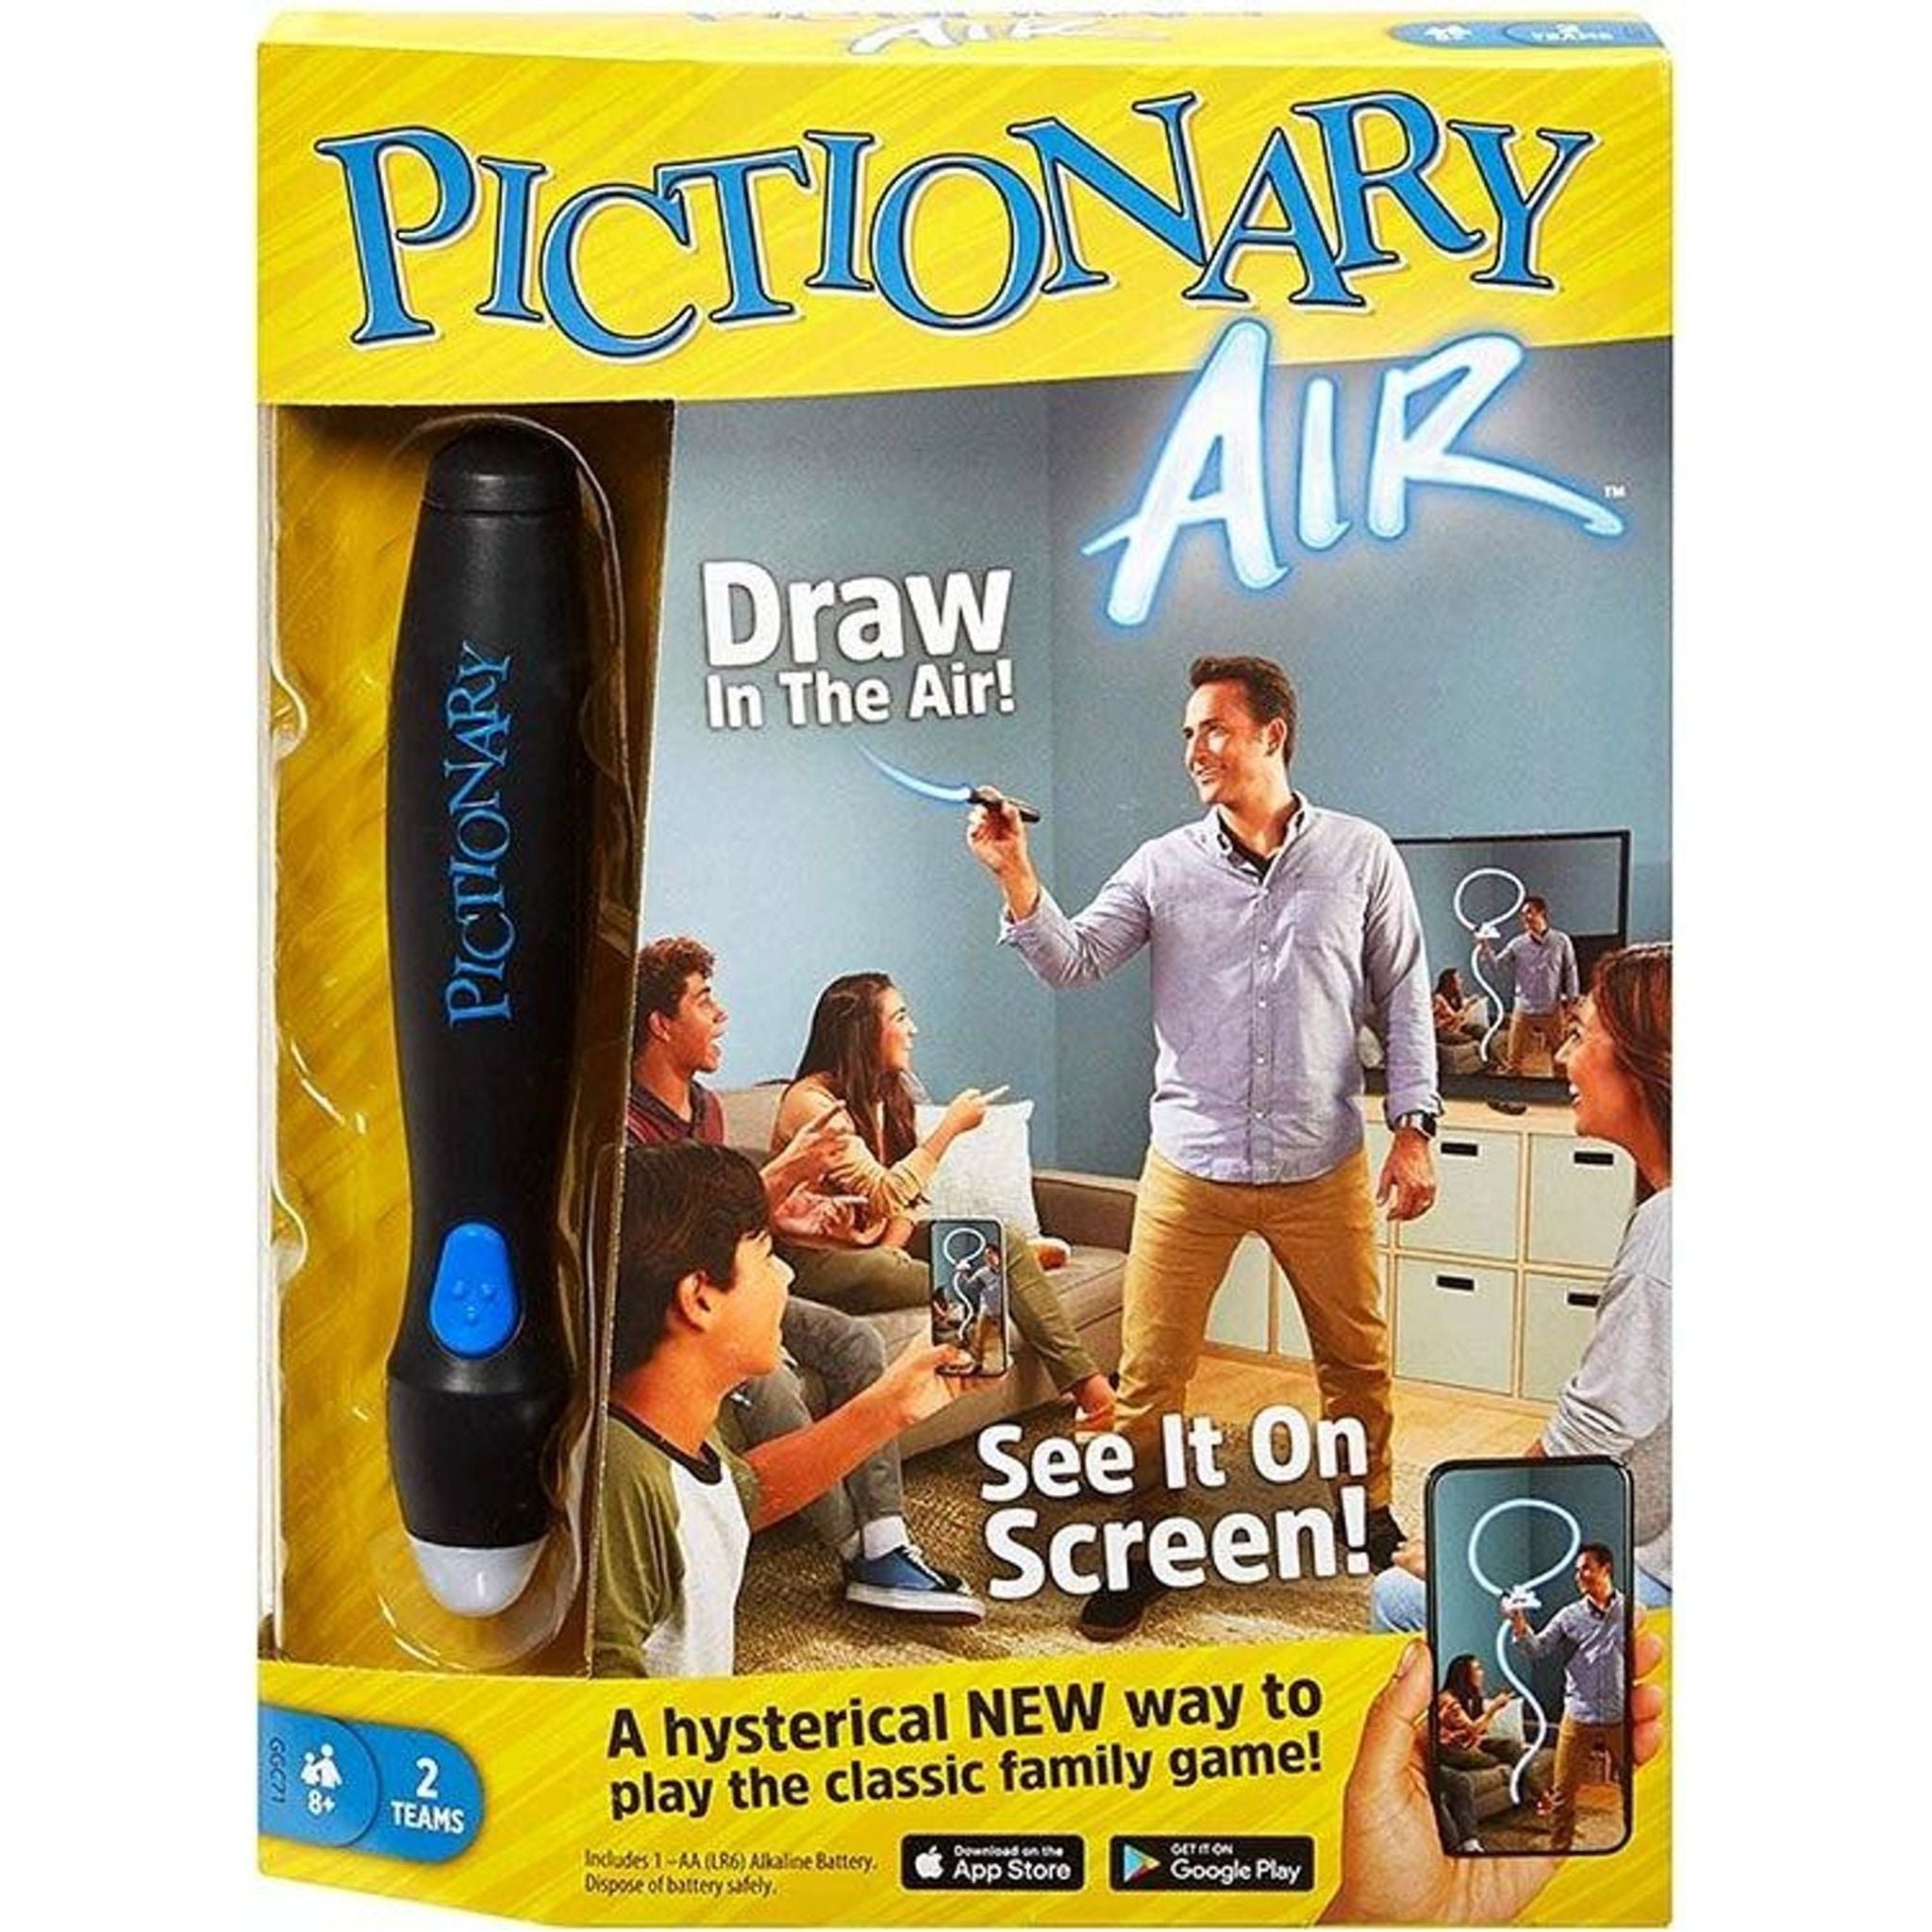 Pictionary Air - Toybox Tales